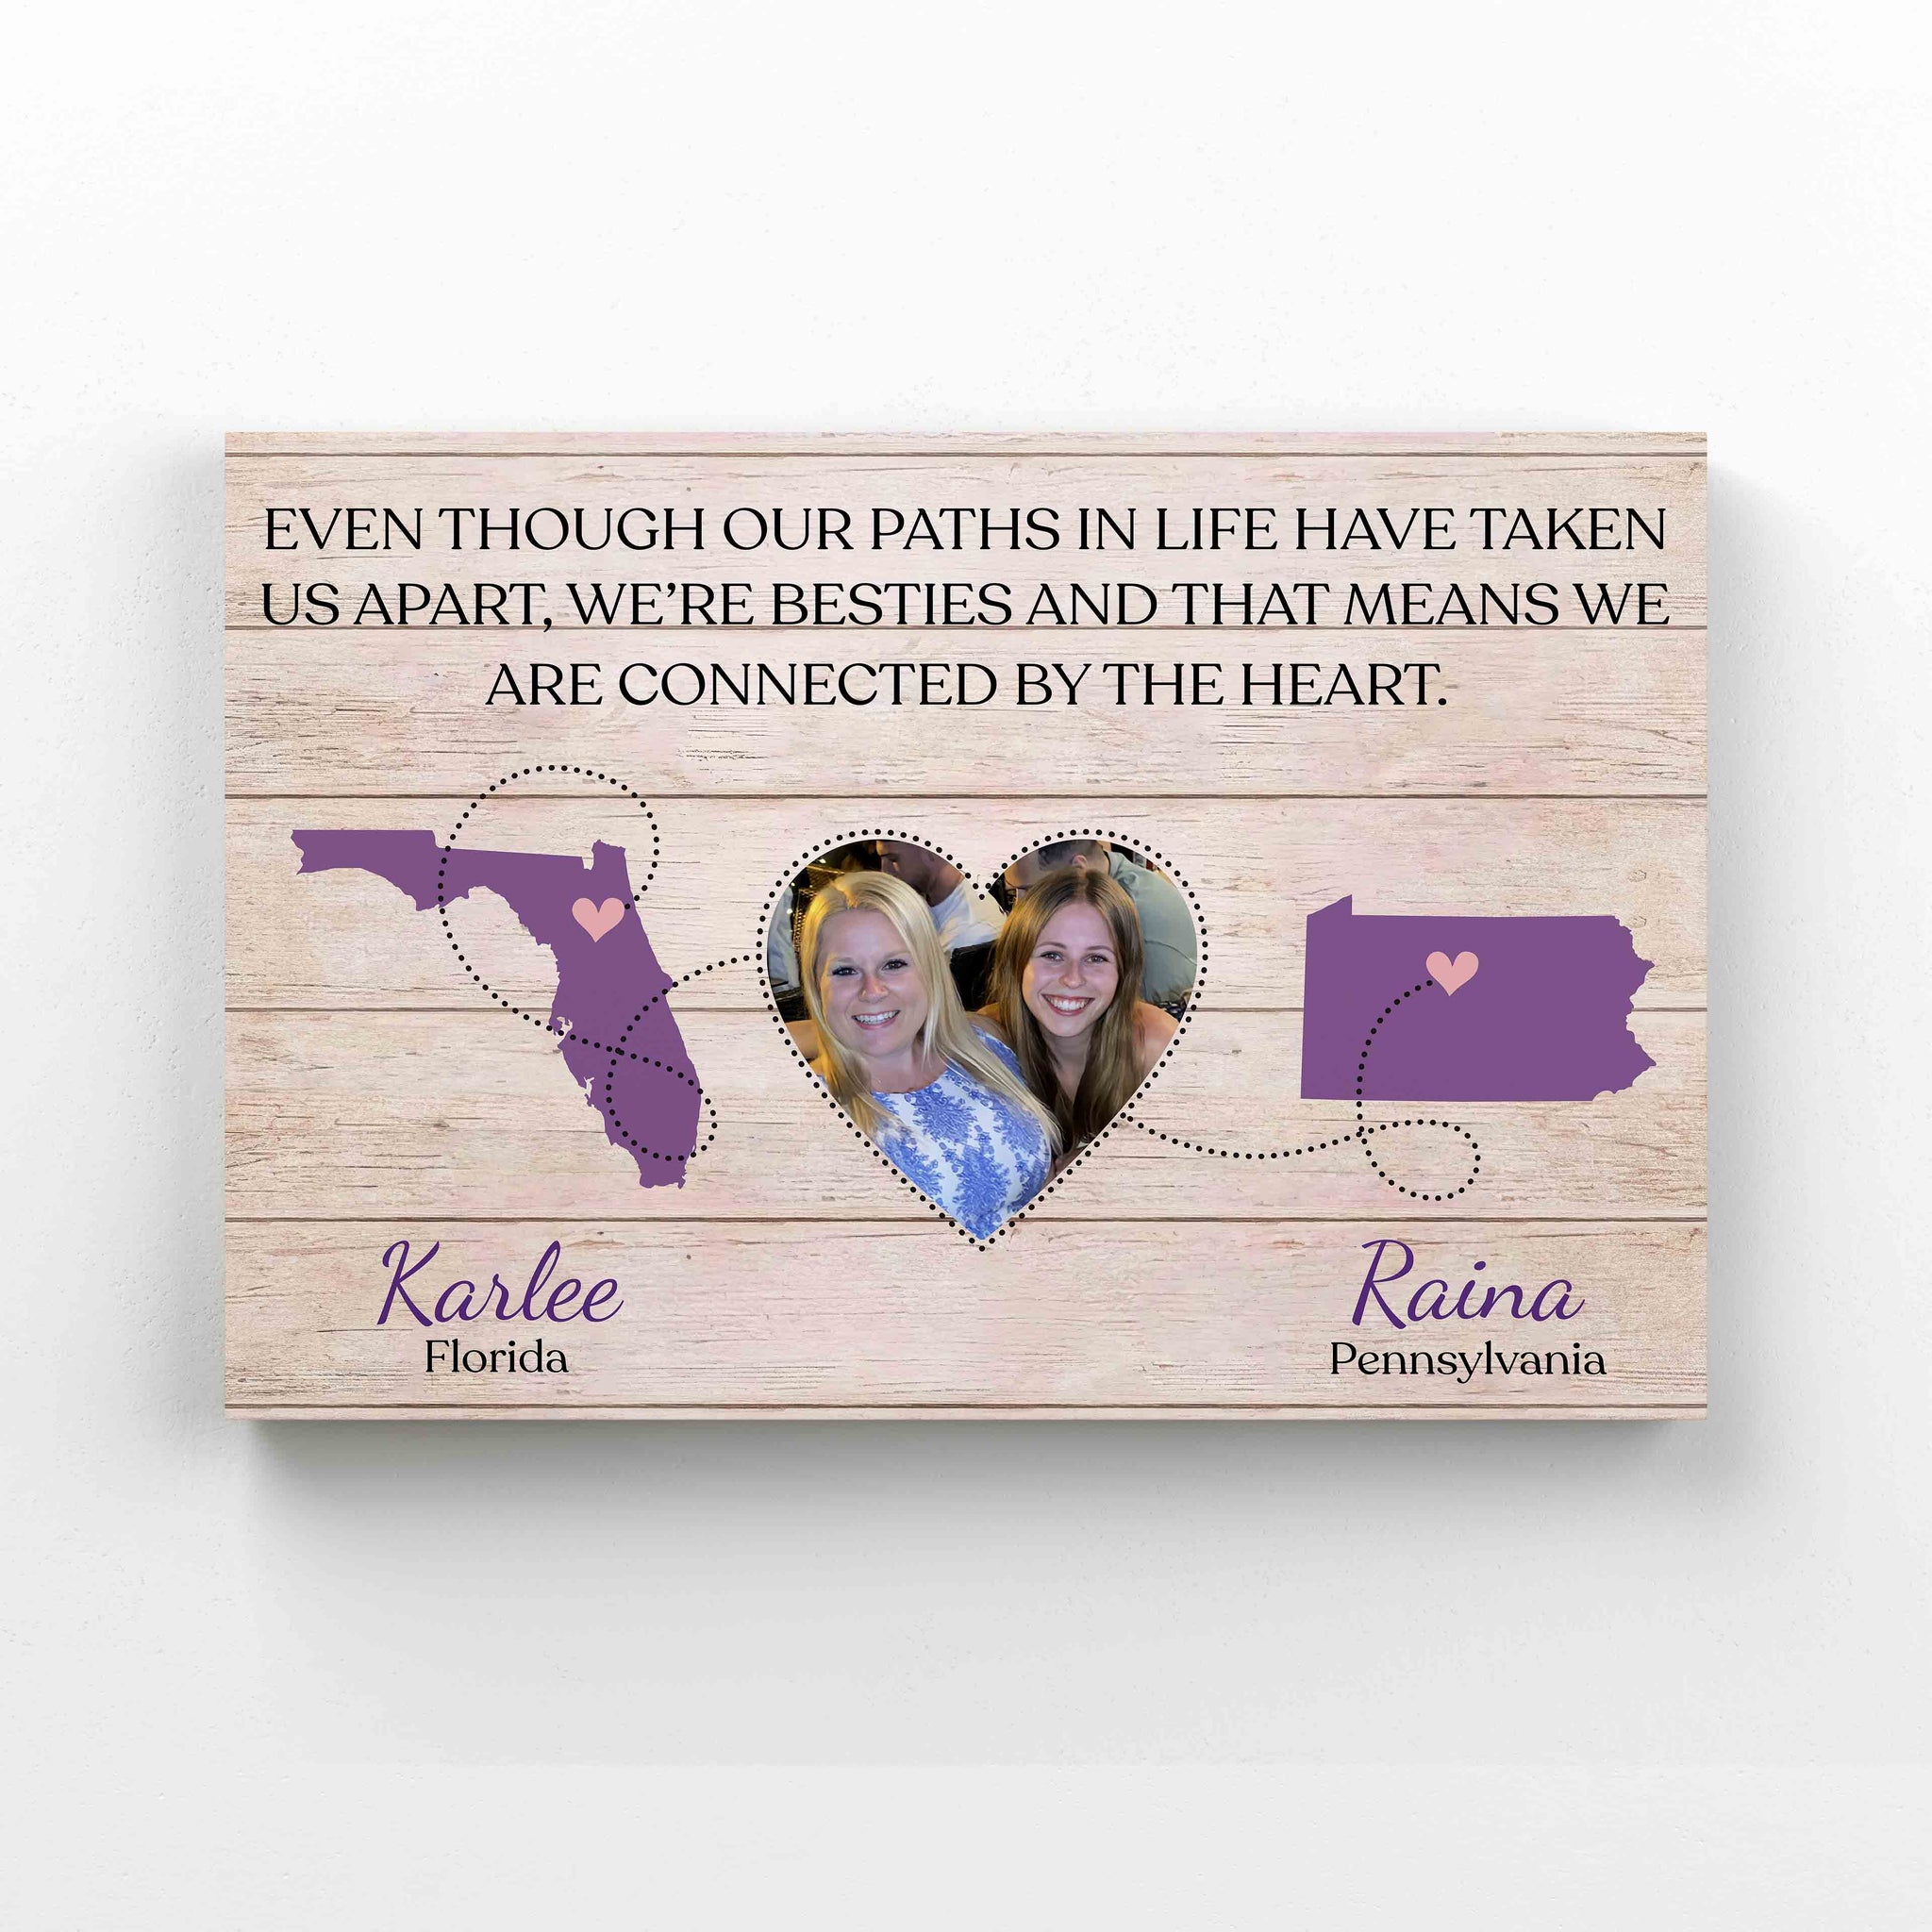 Personalized Image Canvas, Long Distance States Canvas, Friendship Canvas, Gift Canvas